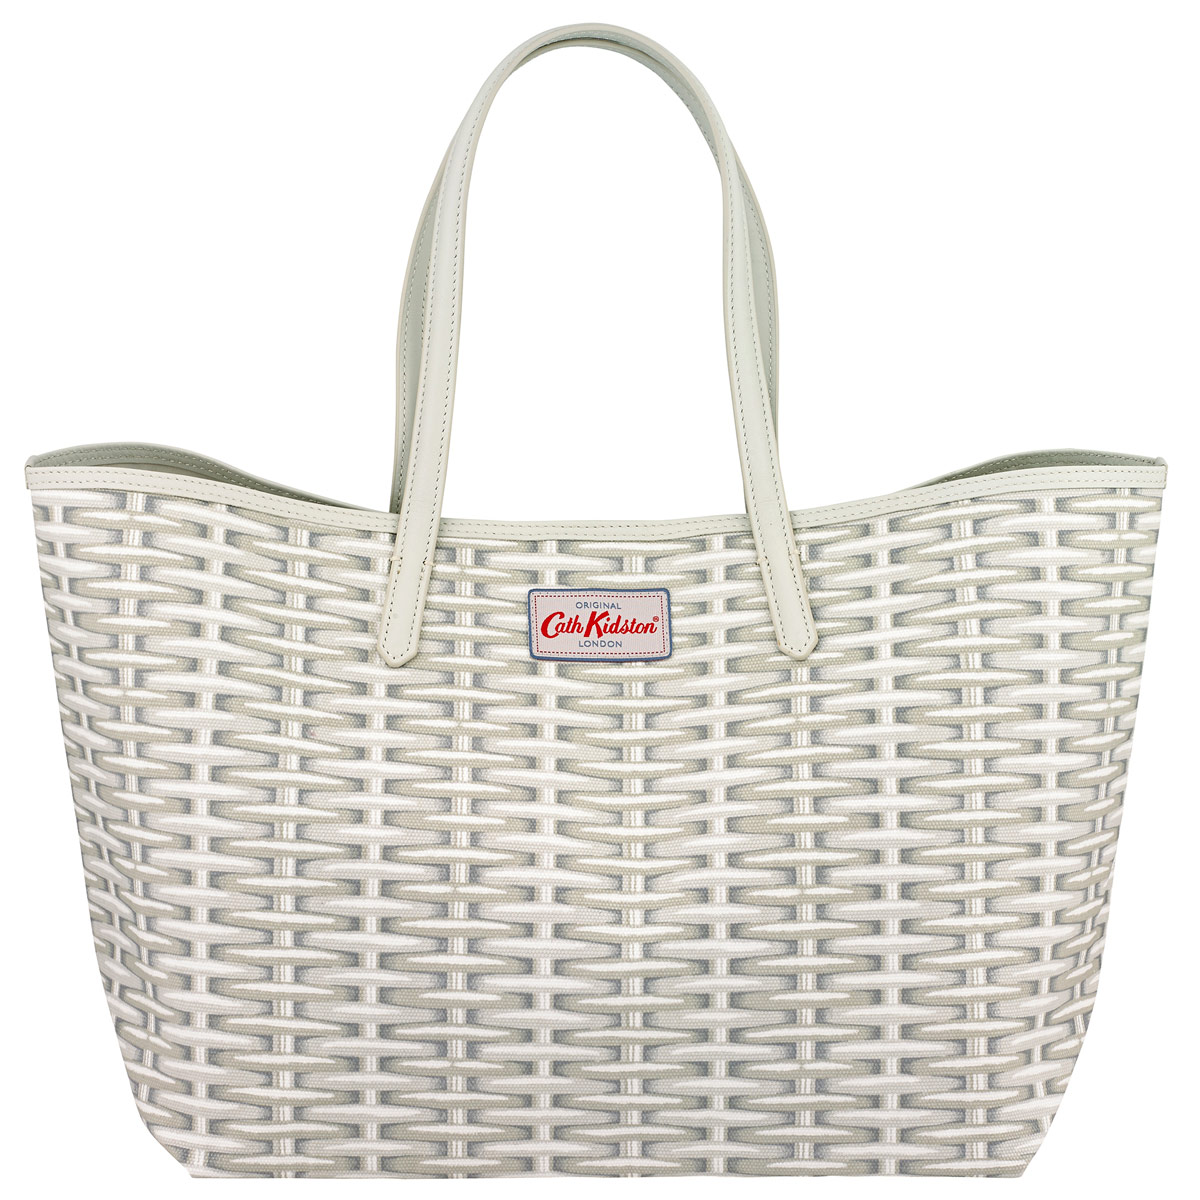 WICKER LARGE LEATHER TRIM TOTE